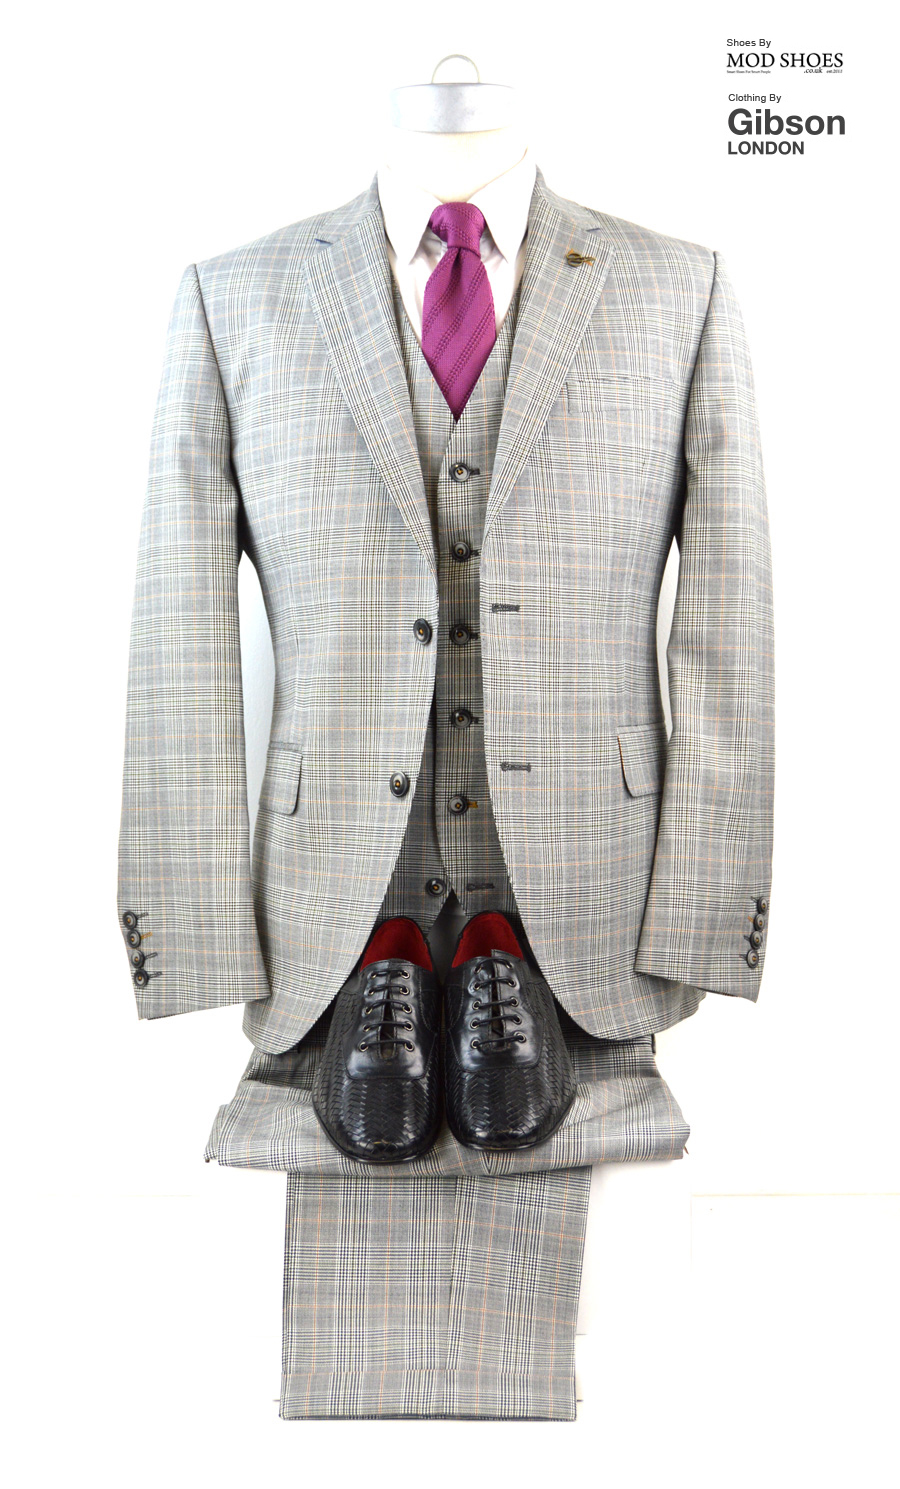 modshoes-with-prince-of-wales-suit-from-gibson-clothing-01